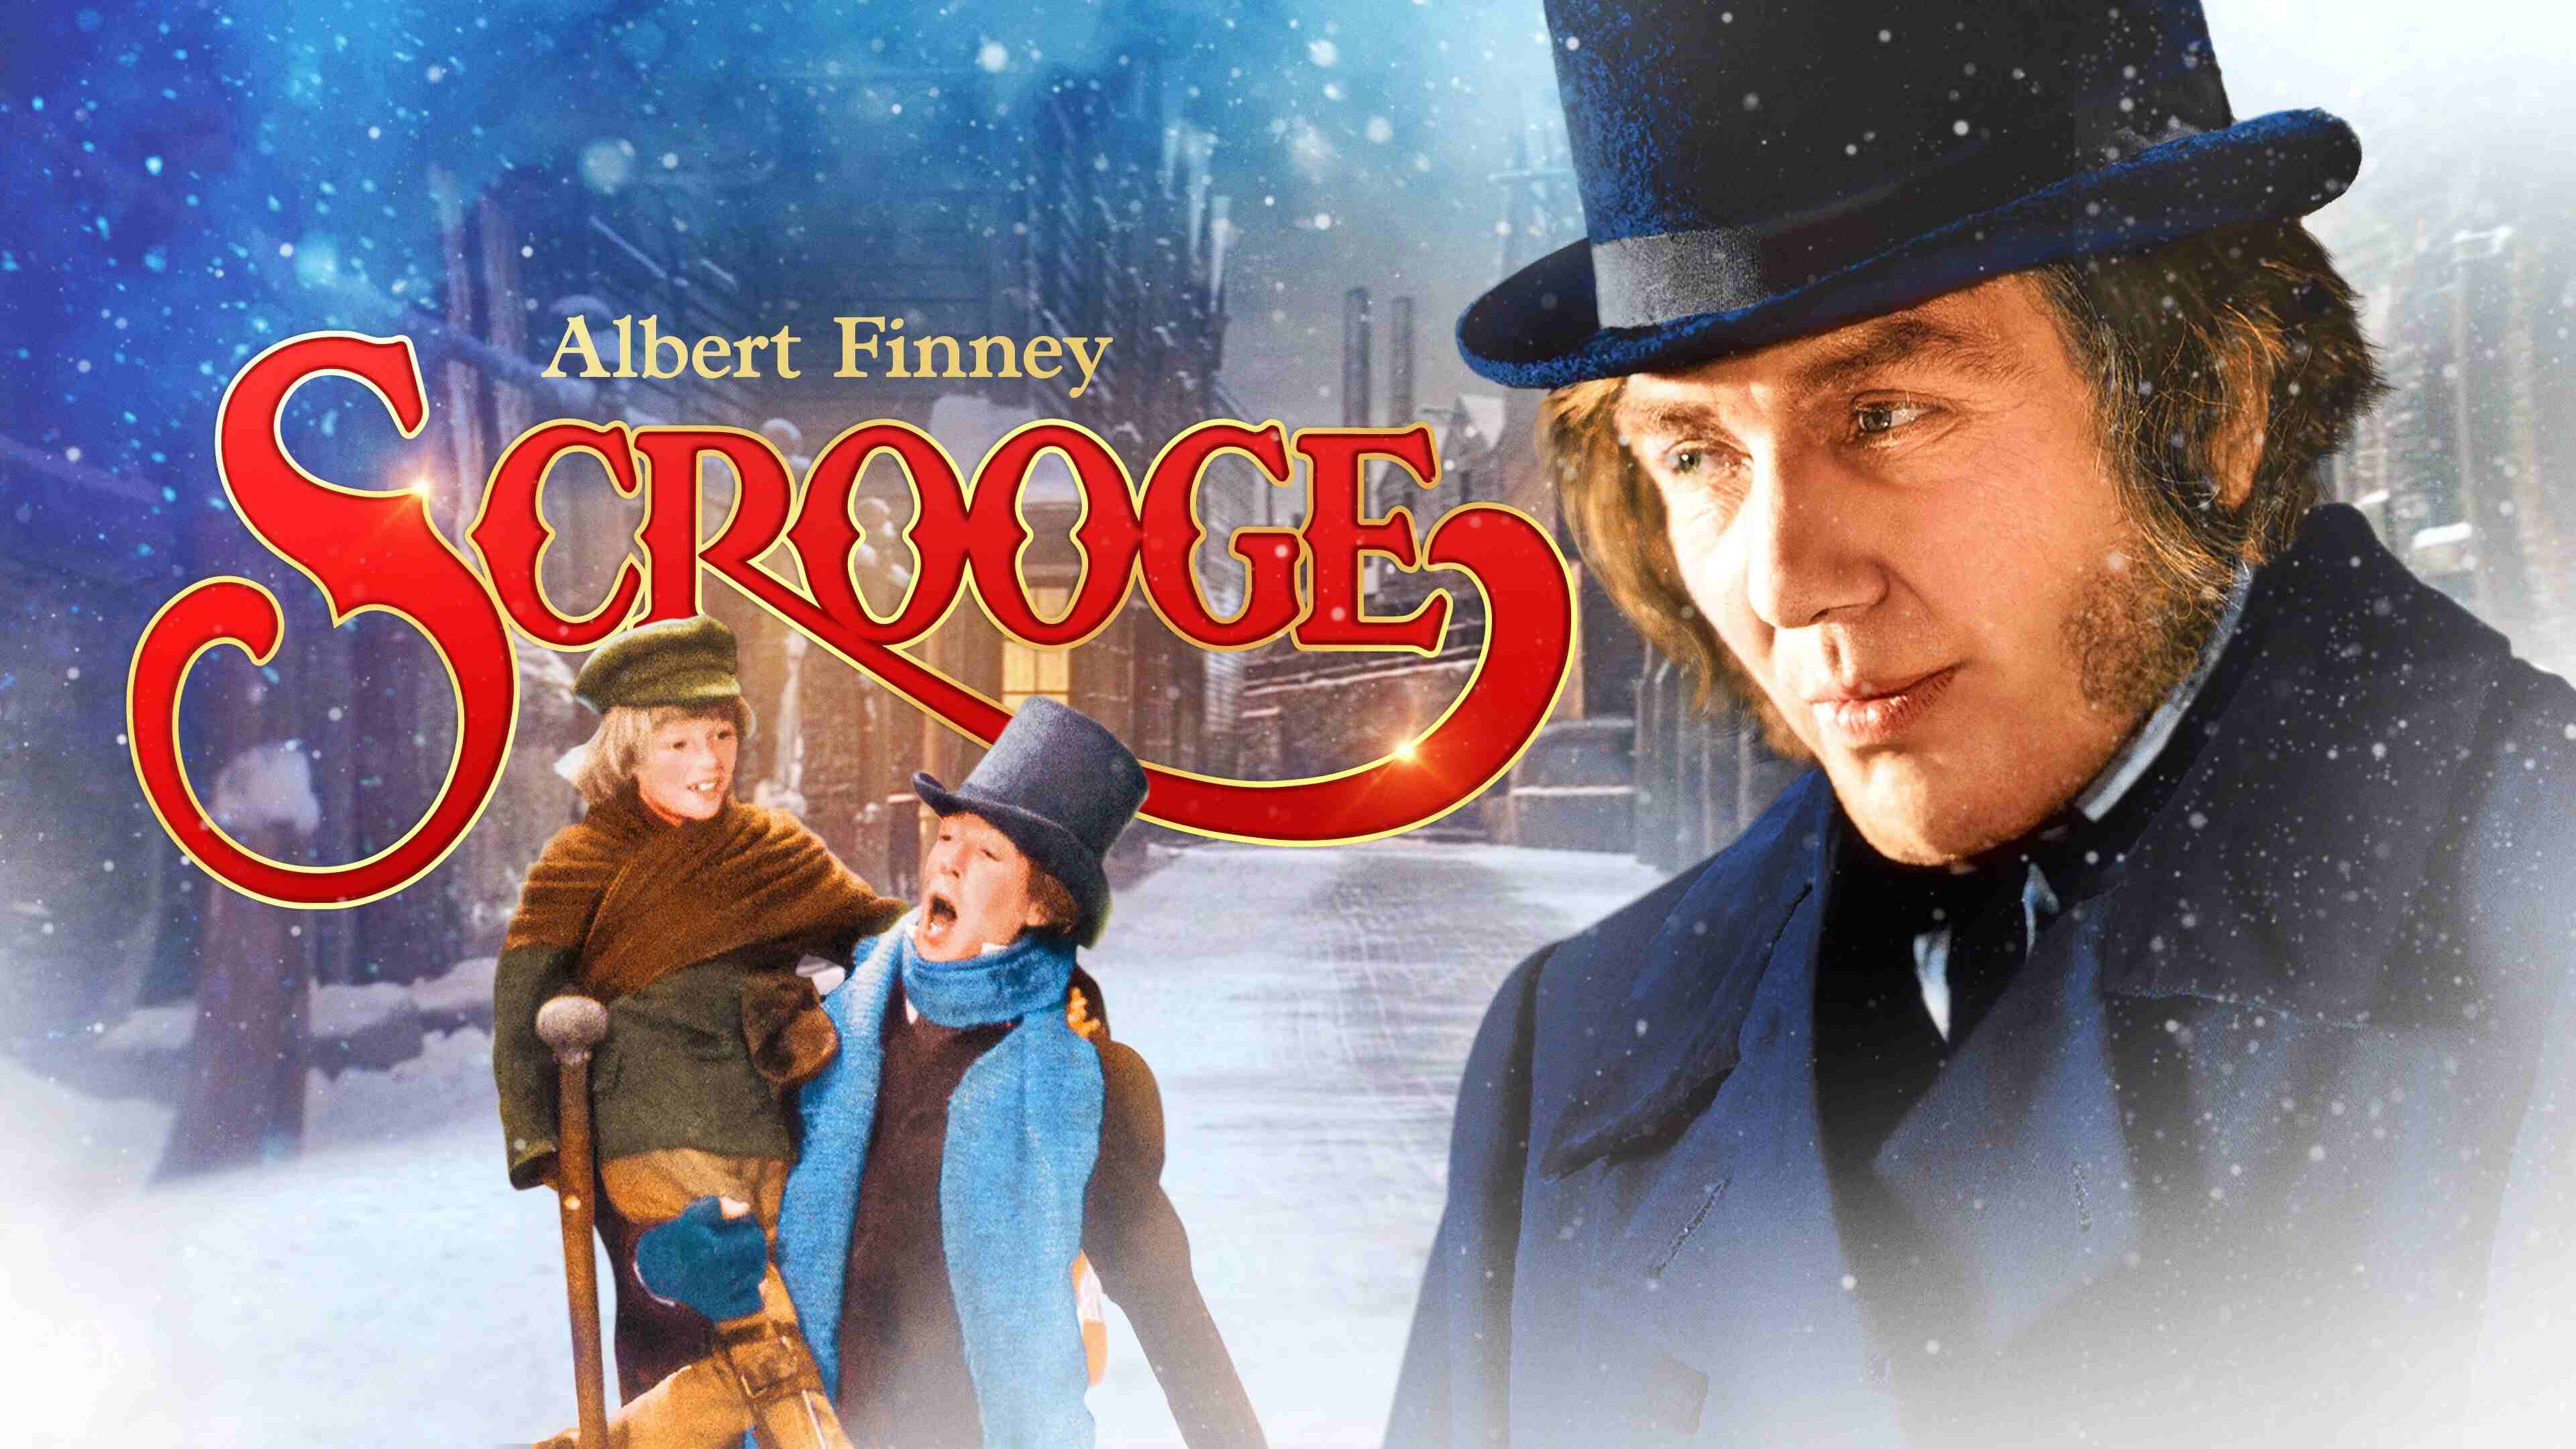 41-facts-about-the-movie-scrooge